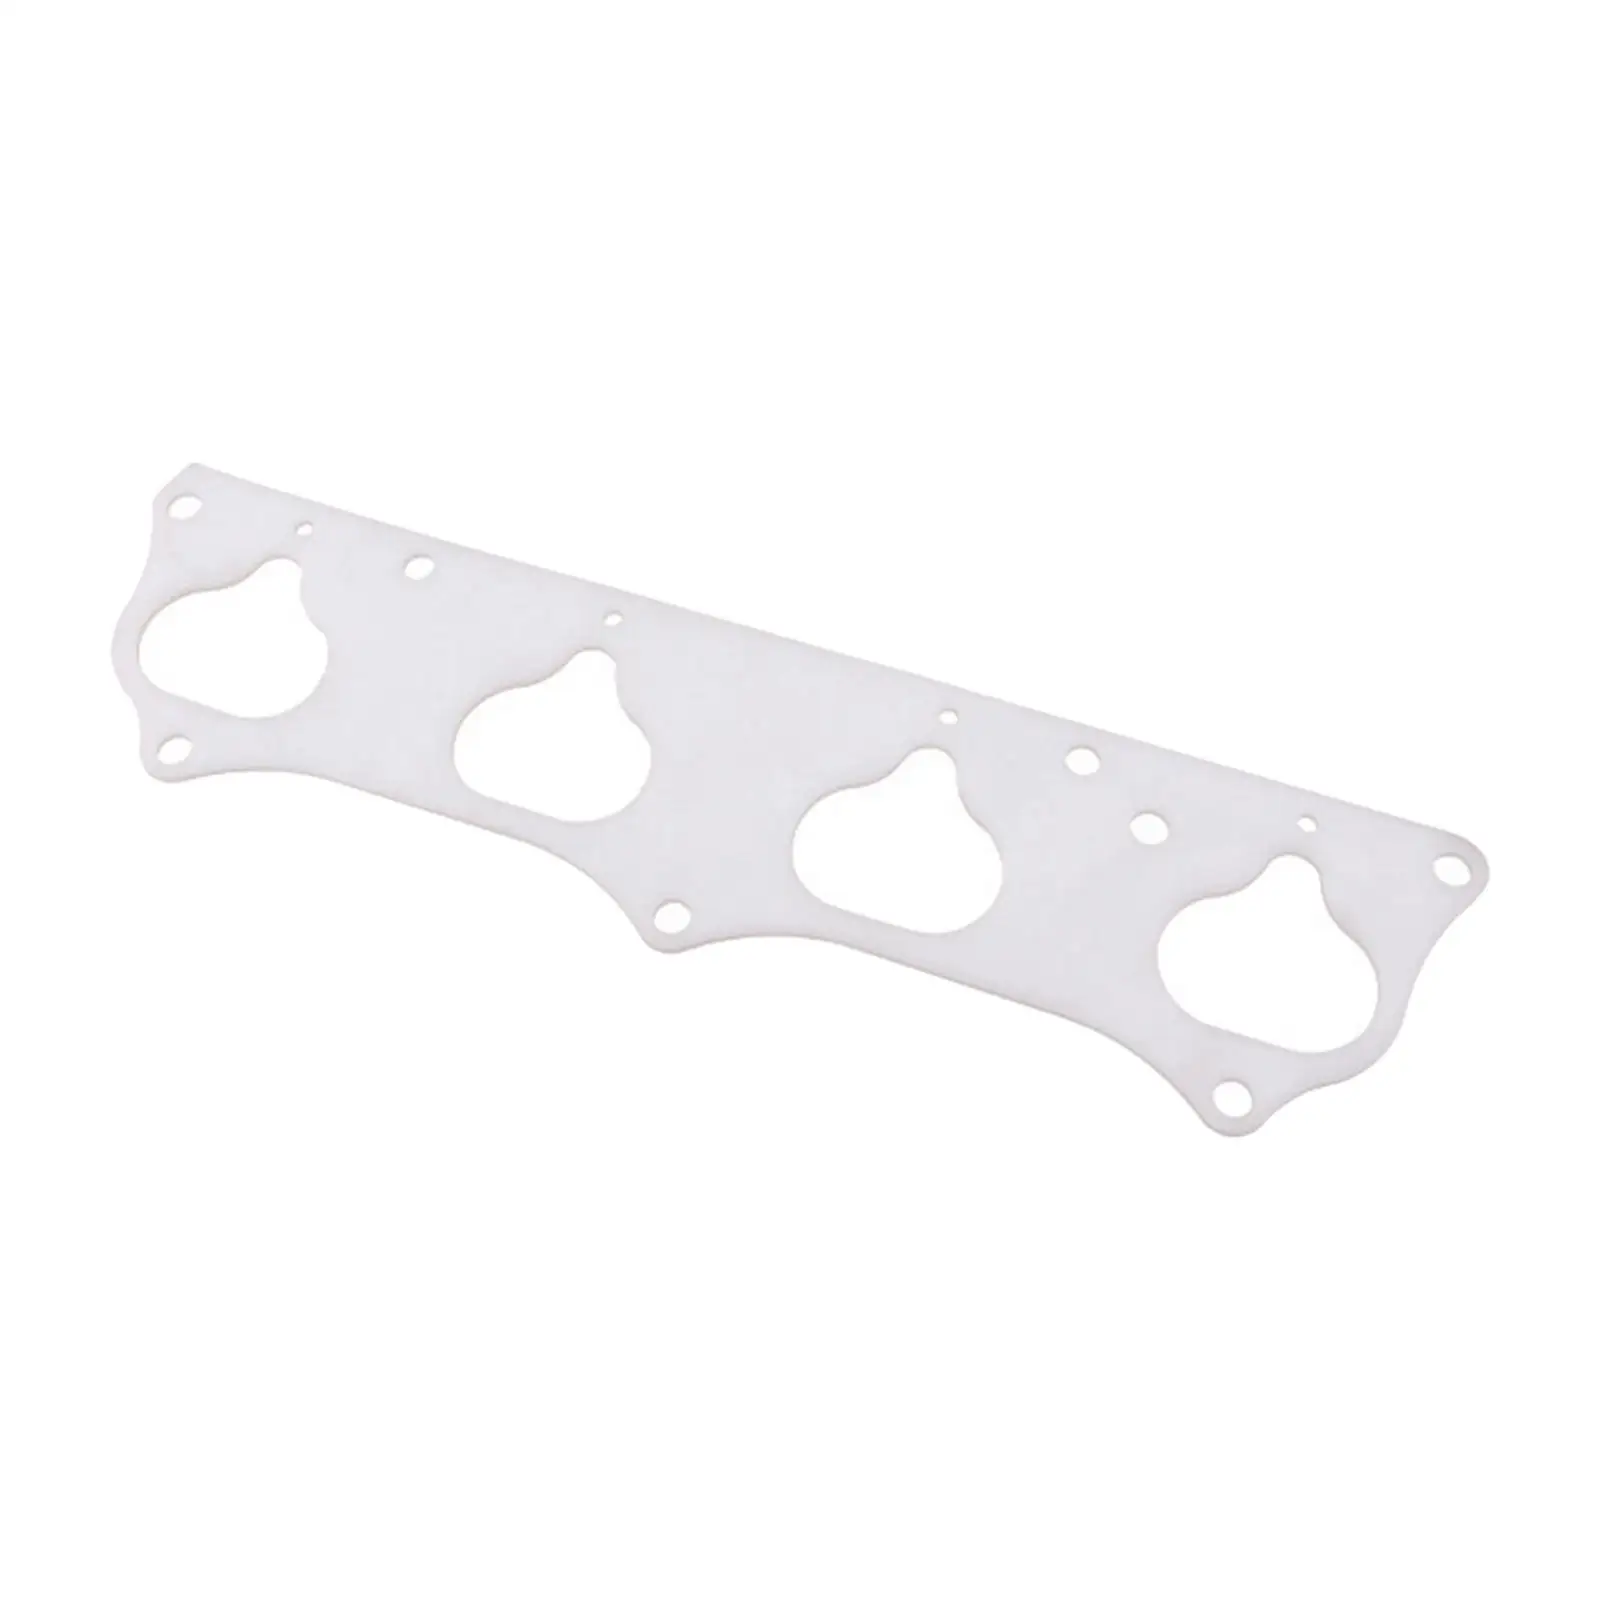 Intake Manifold Gasket High Performance Durable Premium Accessories Spare Parts Replacement for Swap K20A/A2/A3/Z1 K-series